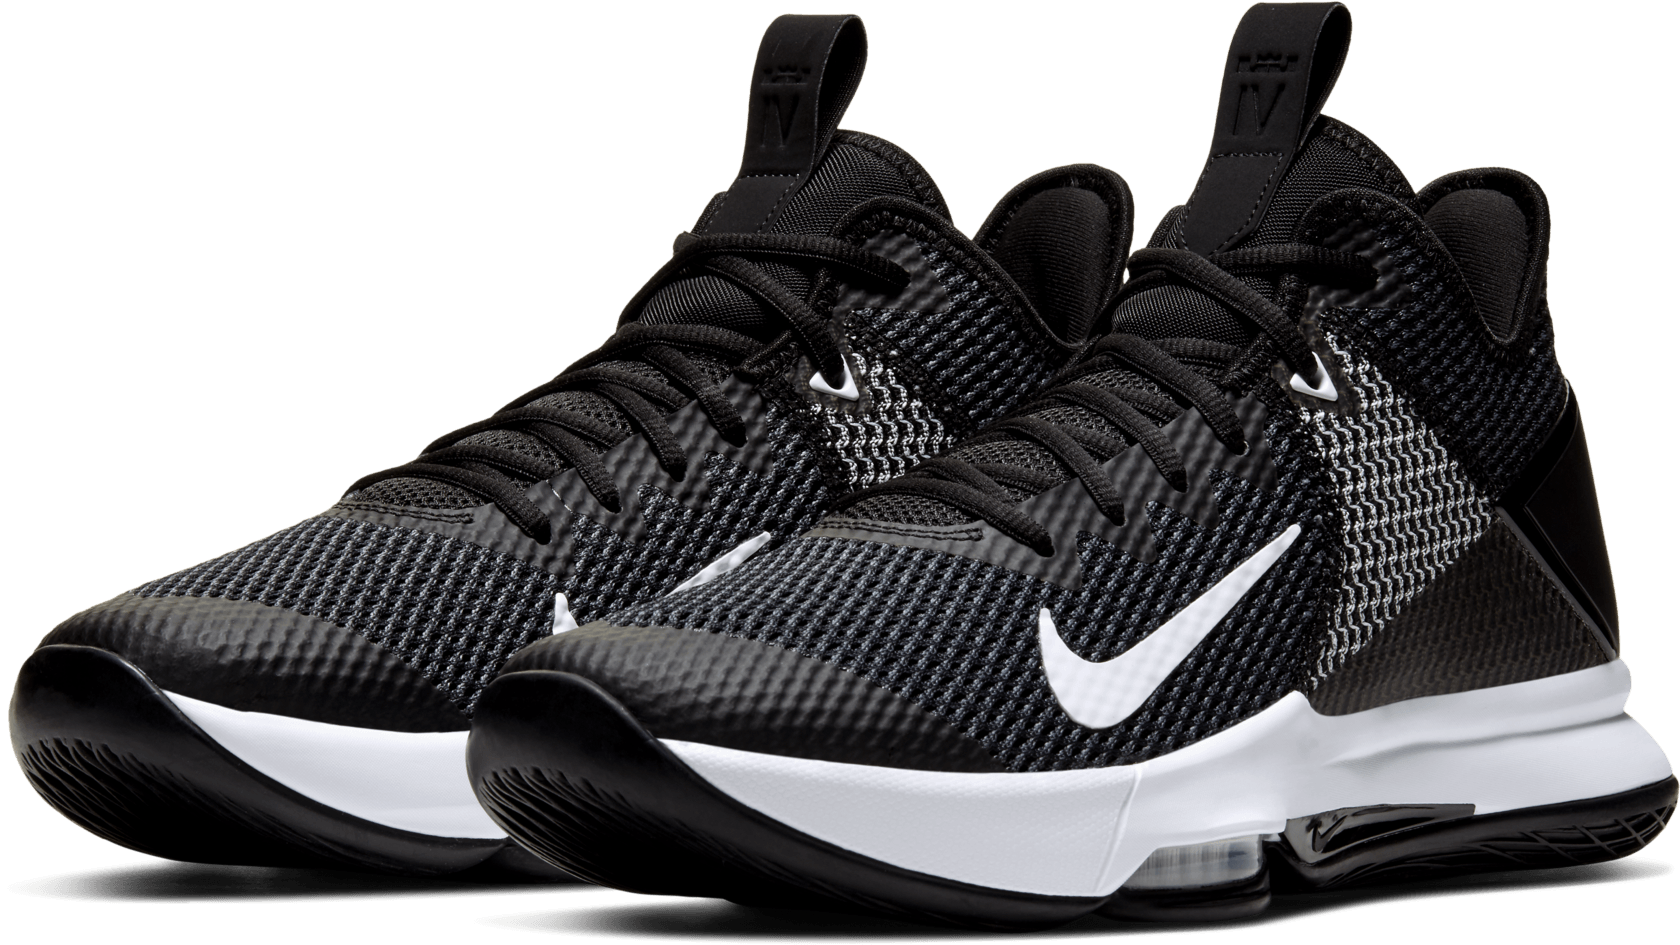 lebron witness 4 outdoor review